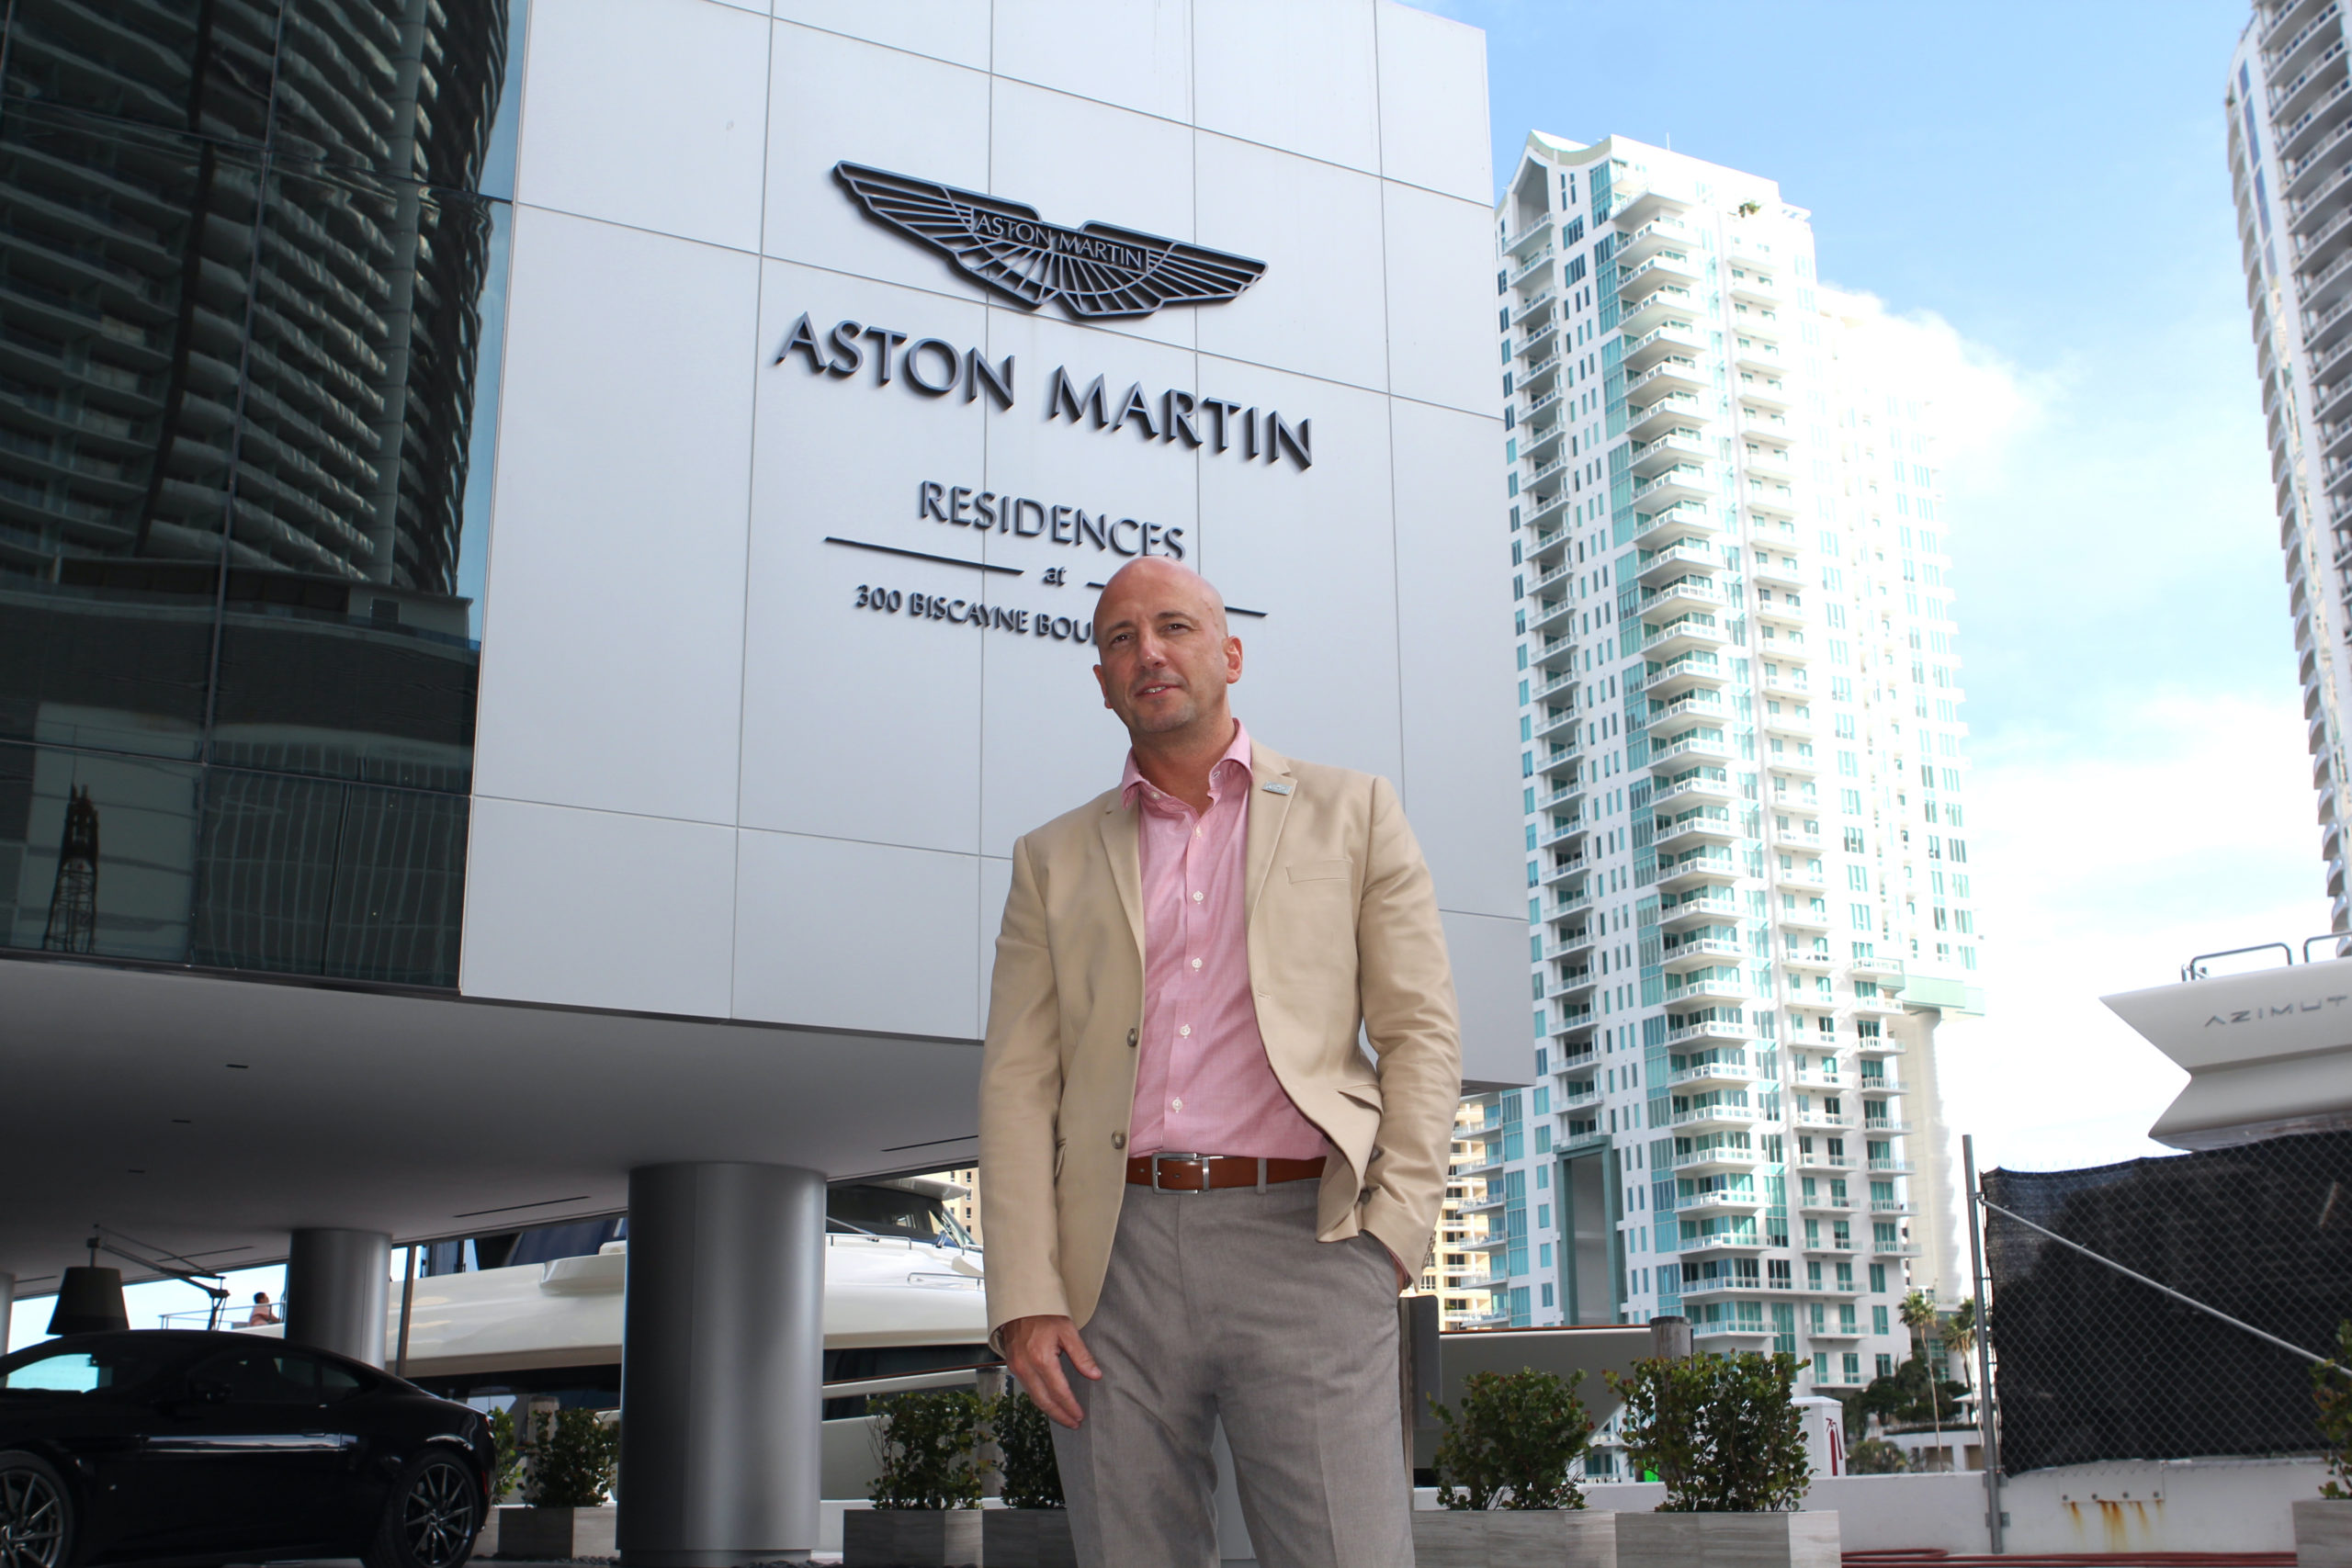 German Coto, CEO of G&G Business Developments at the Aston Martin residences